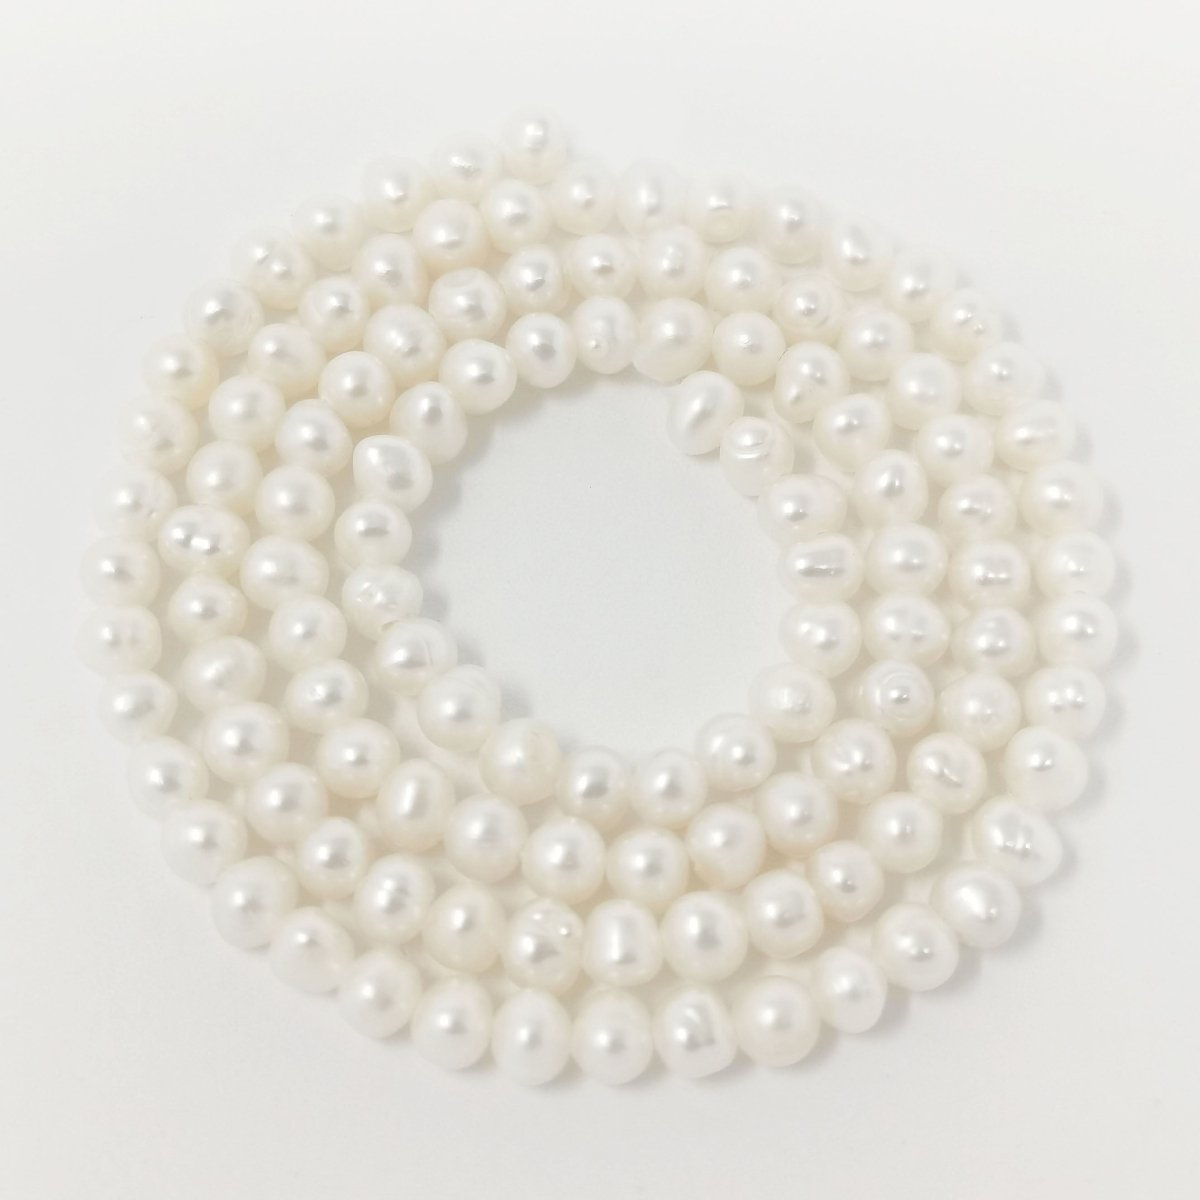 4mm - 5mm Round Button White Freshwater Pearl Jewelry Making | WA-035 Clearance Pricing - DLUXCA